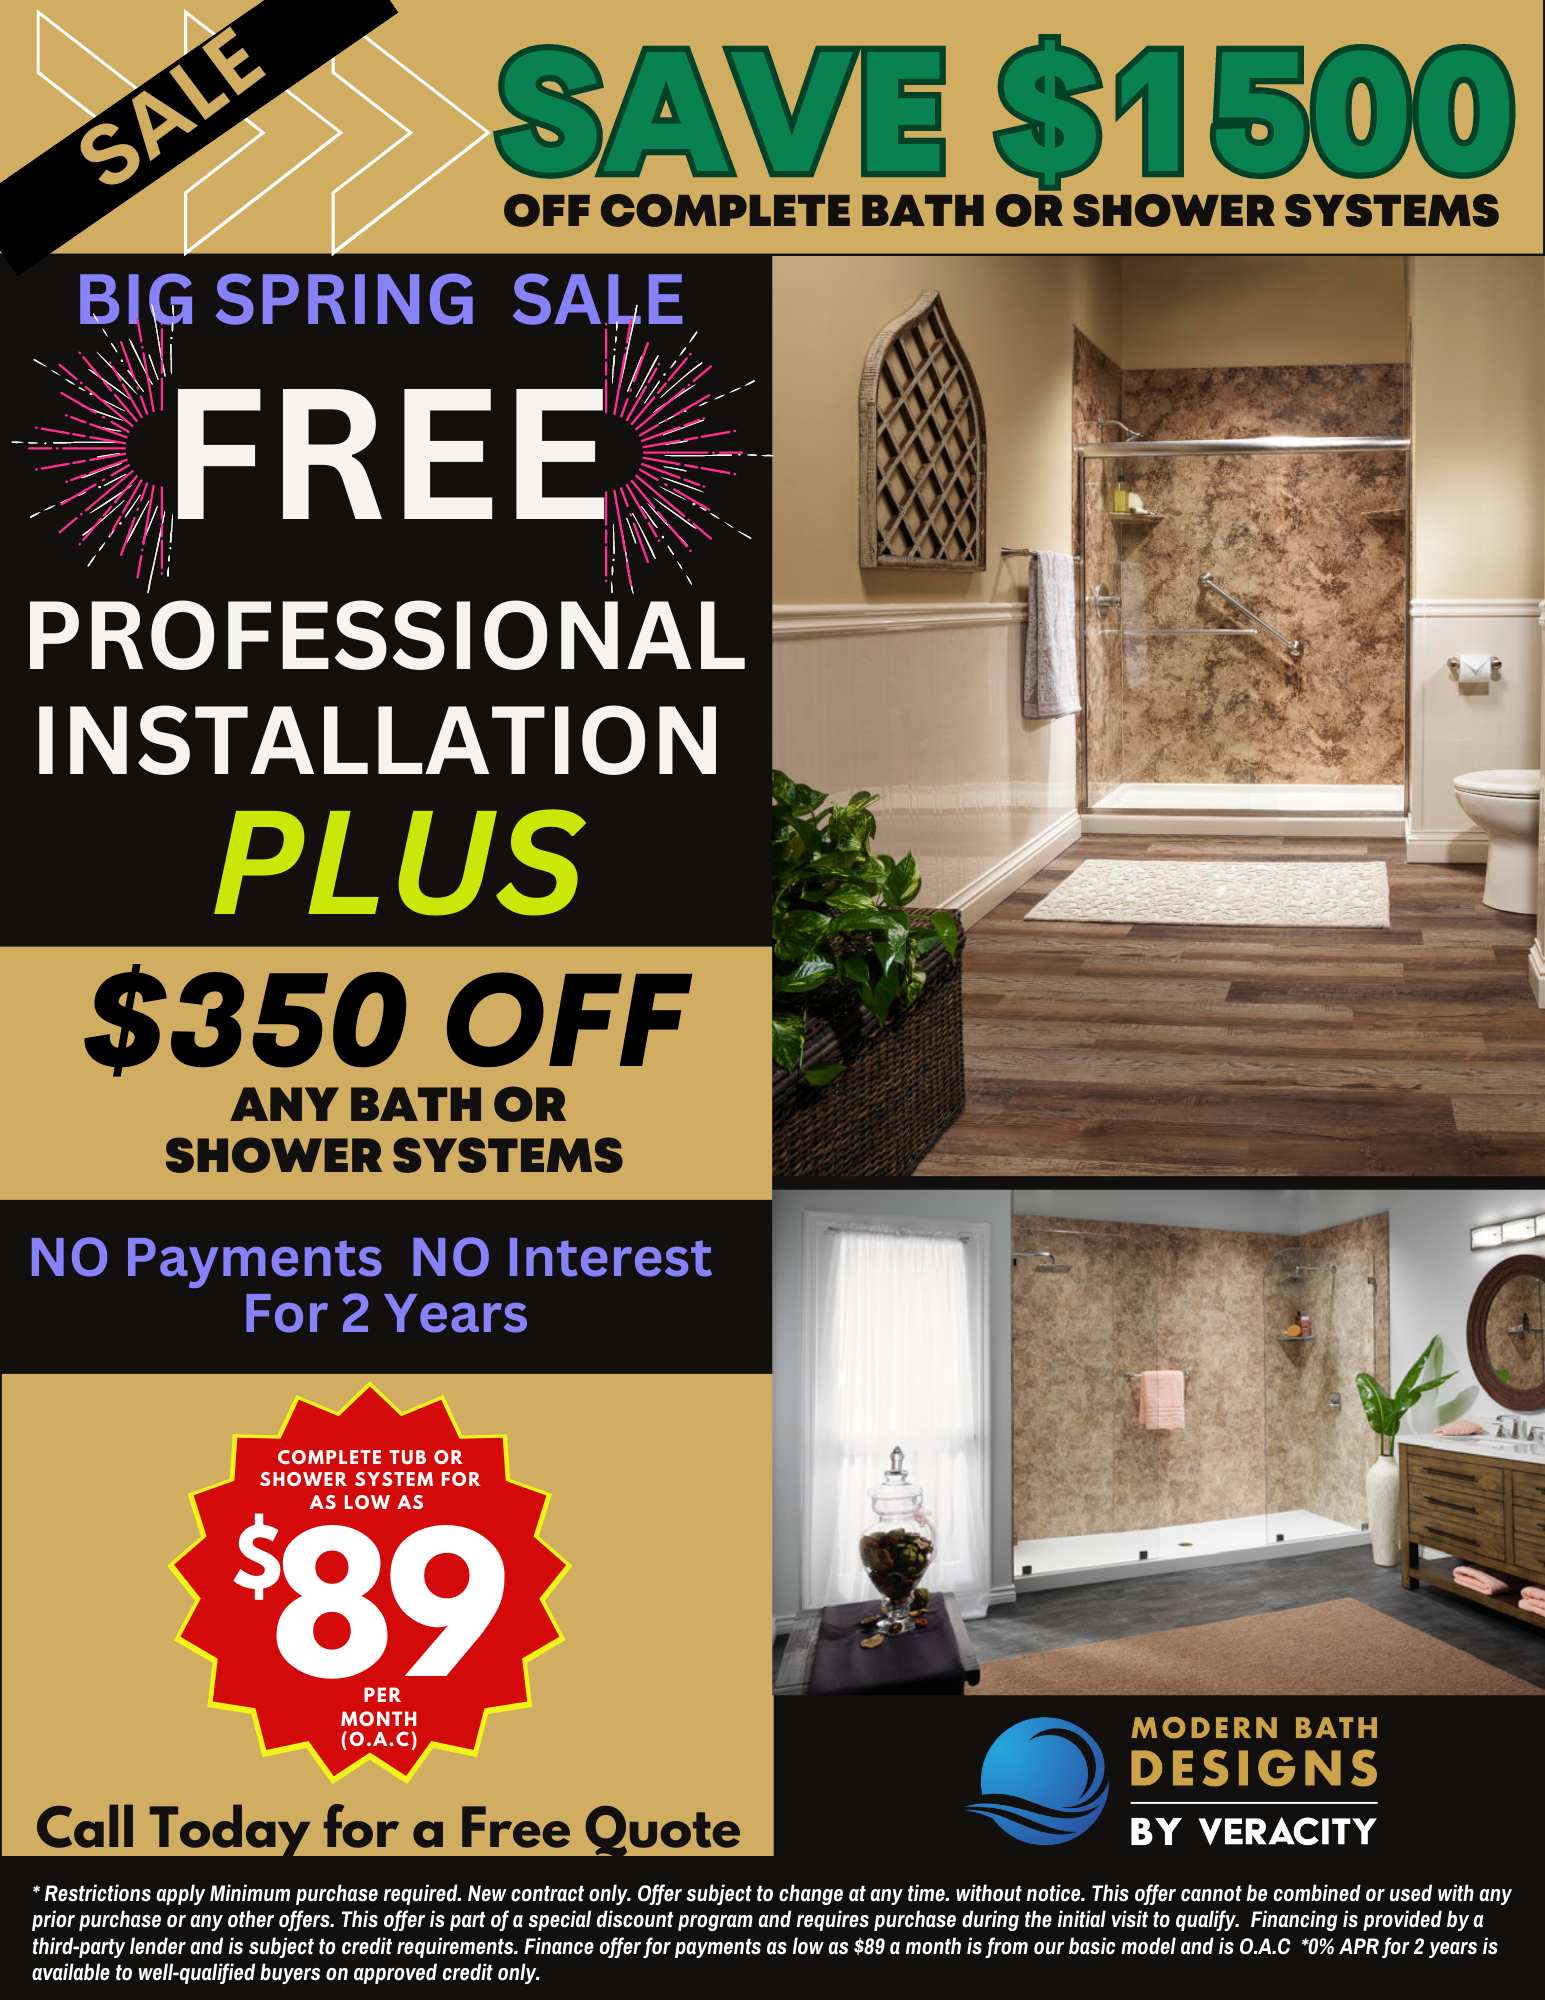 SAVE $1500 with FREE Professional Installation + $350 OFF every bath or shower system. With 2 Year No Payments No Interest – OR for as little as $89 a month receive a completely new shower or tub replacements.